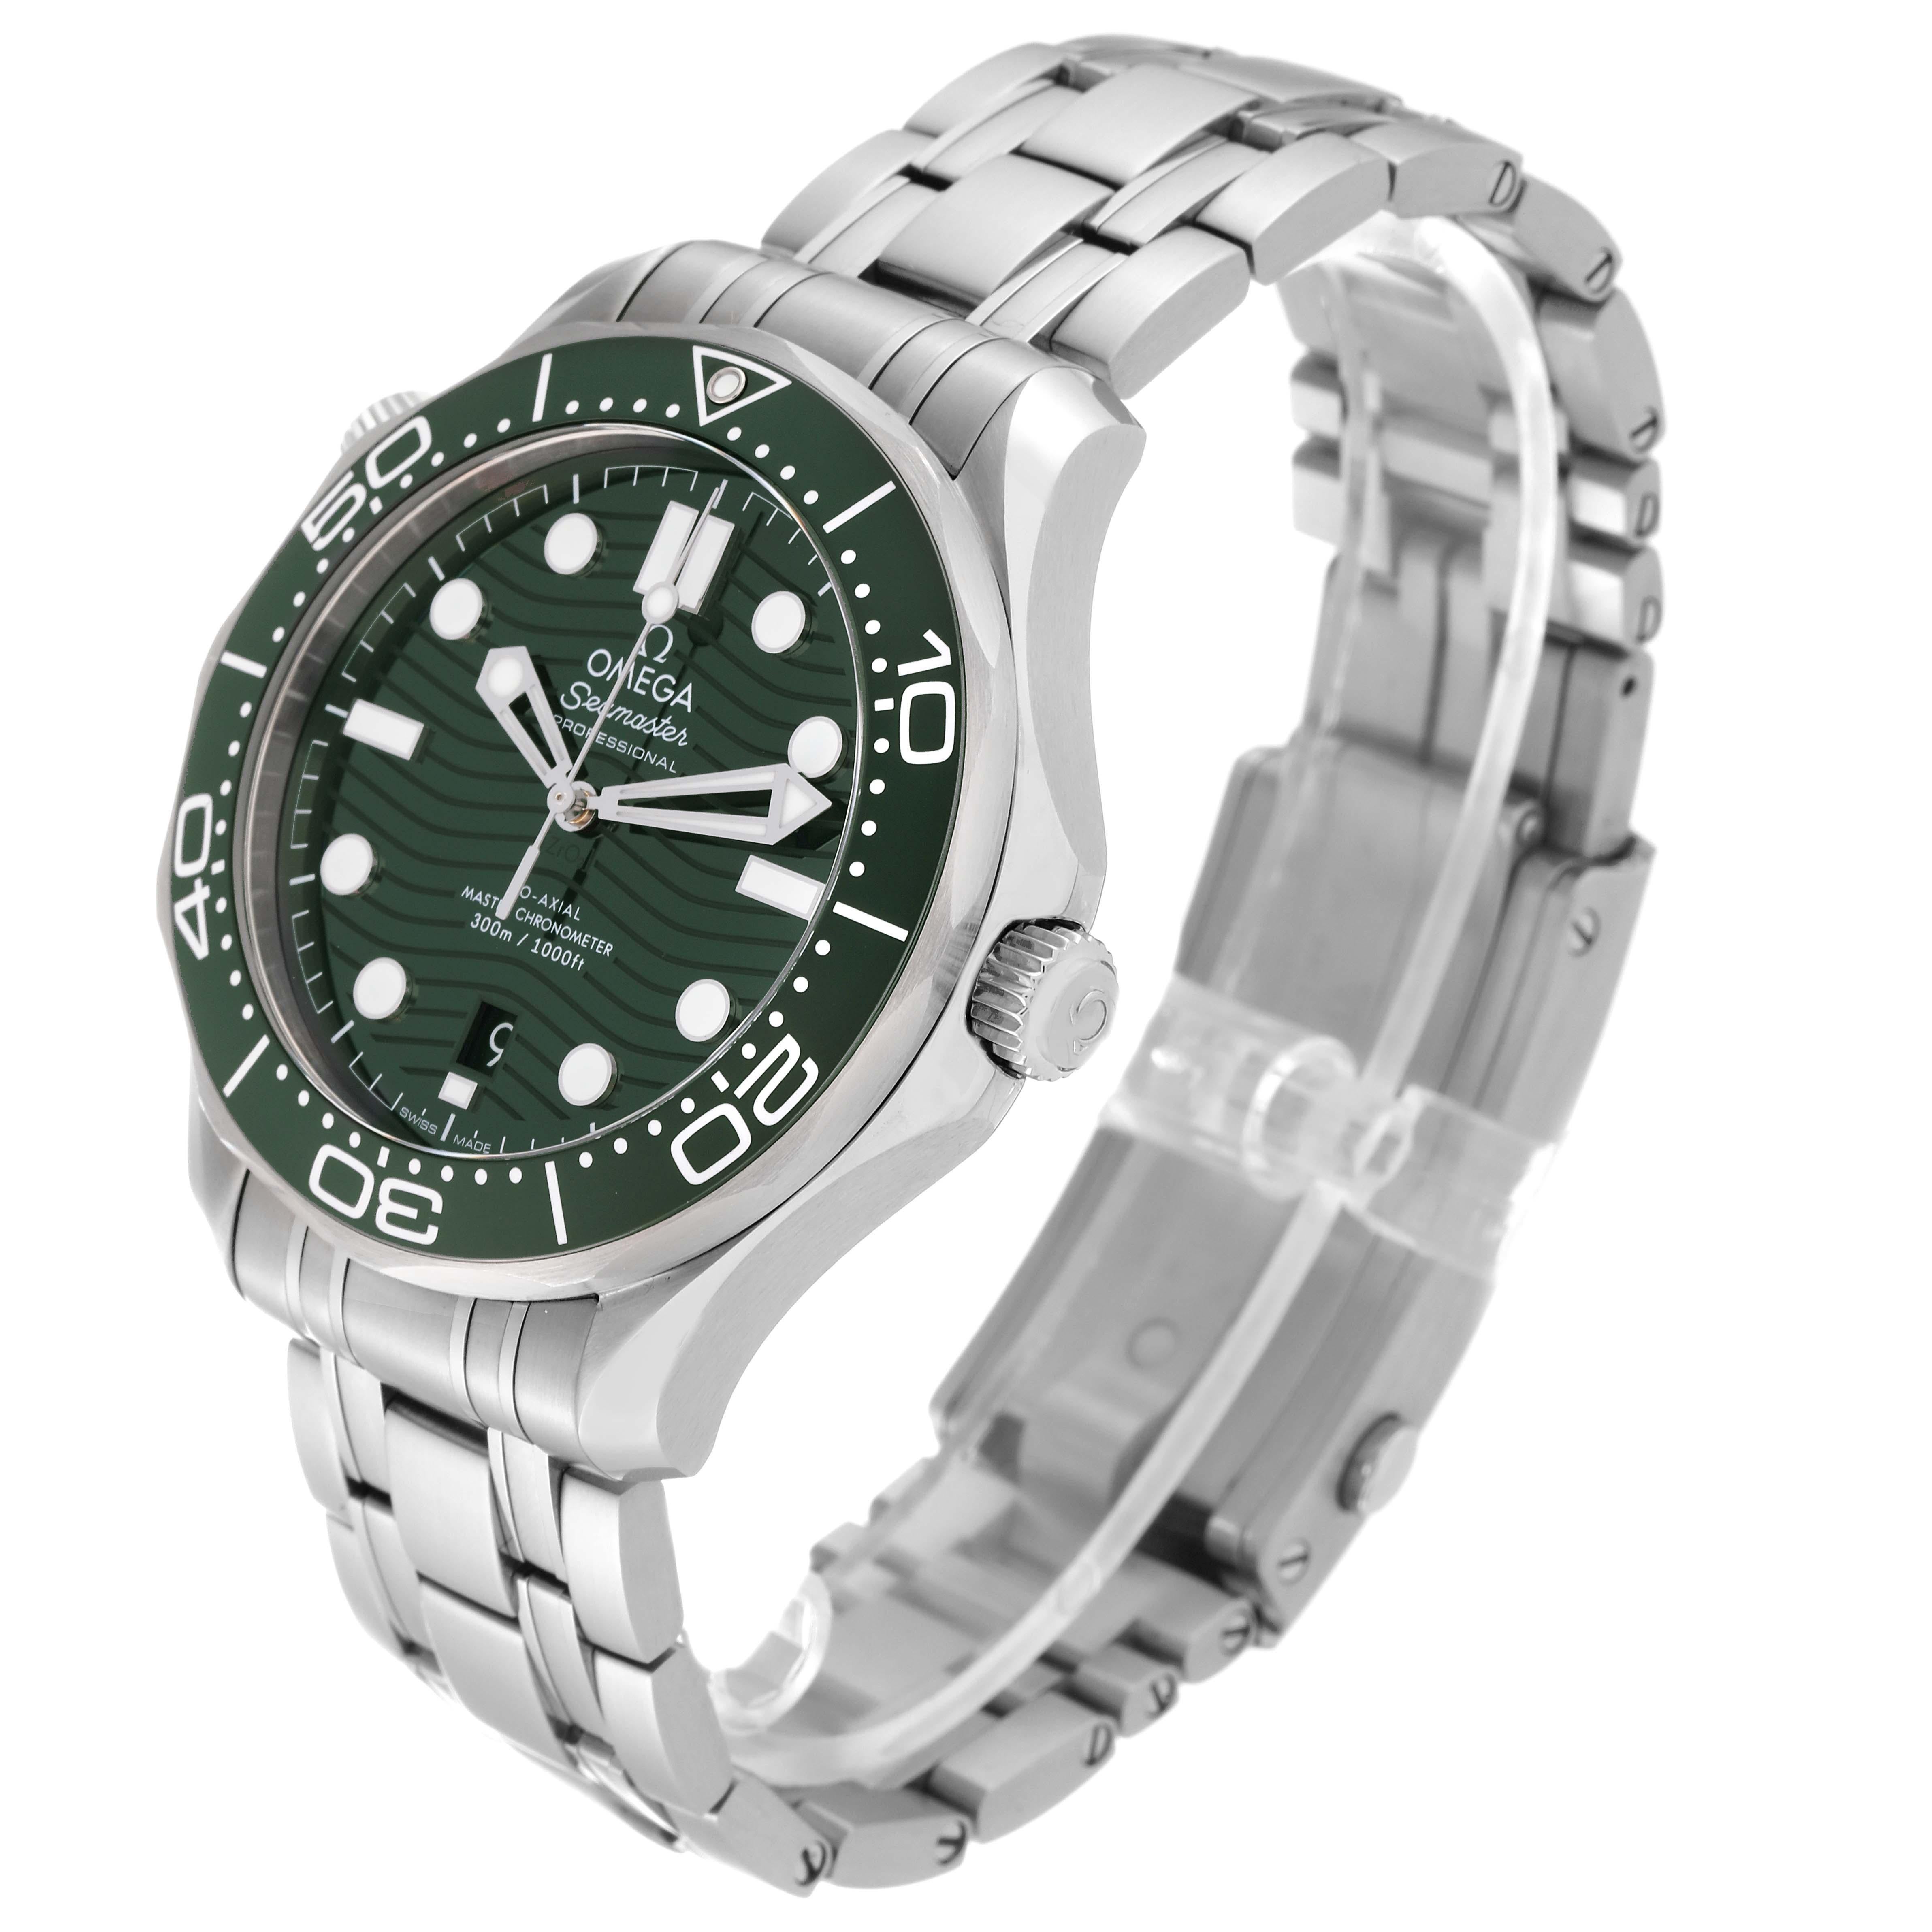 Omega Seamaster Diver Green Dial Steel Mens Watch 210.30.42.20.10.001 Box Card 2